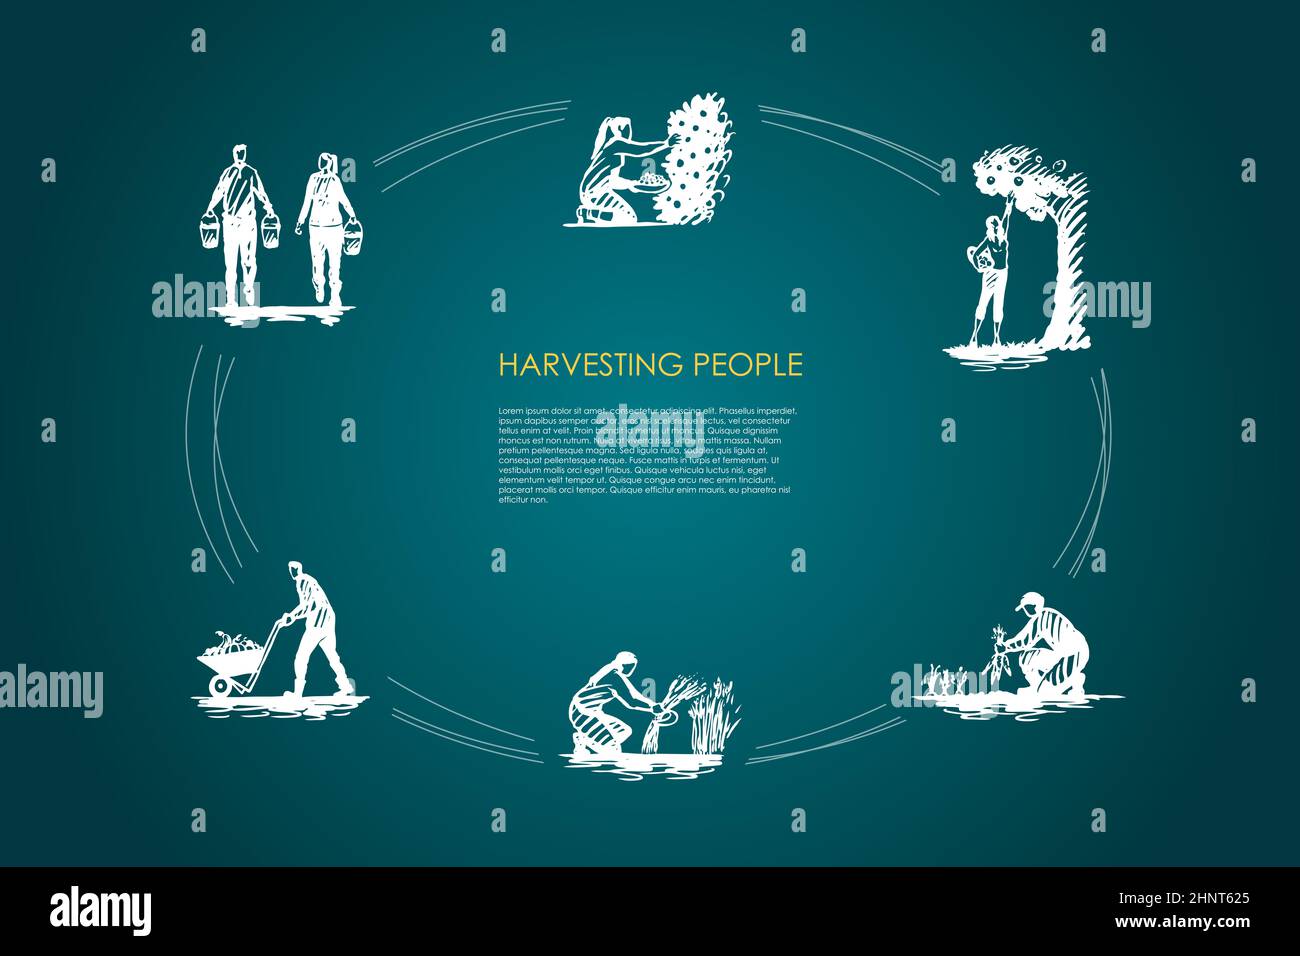 Harvesting people - people picking fruits and carrots, binding grass, carrying and transporting harvest vector concept set. Hand drawn sketch isolated Stock Photo